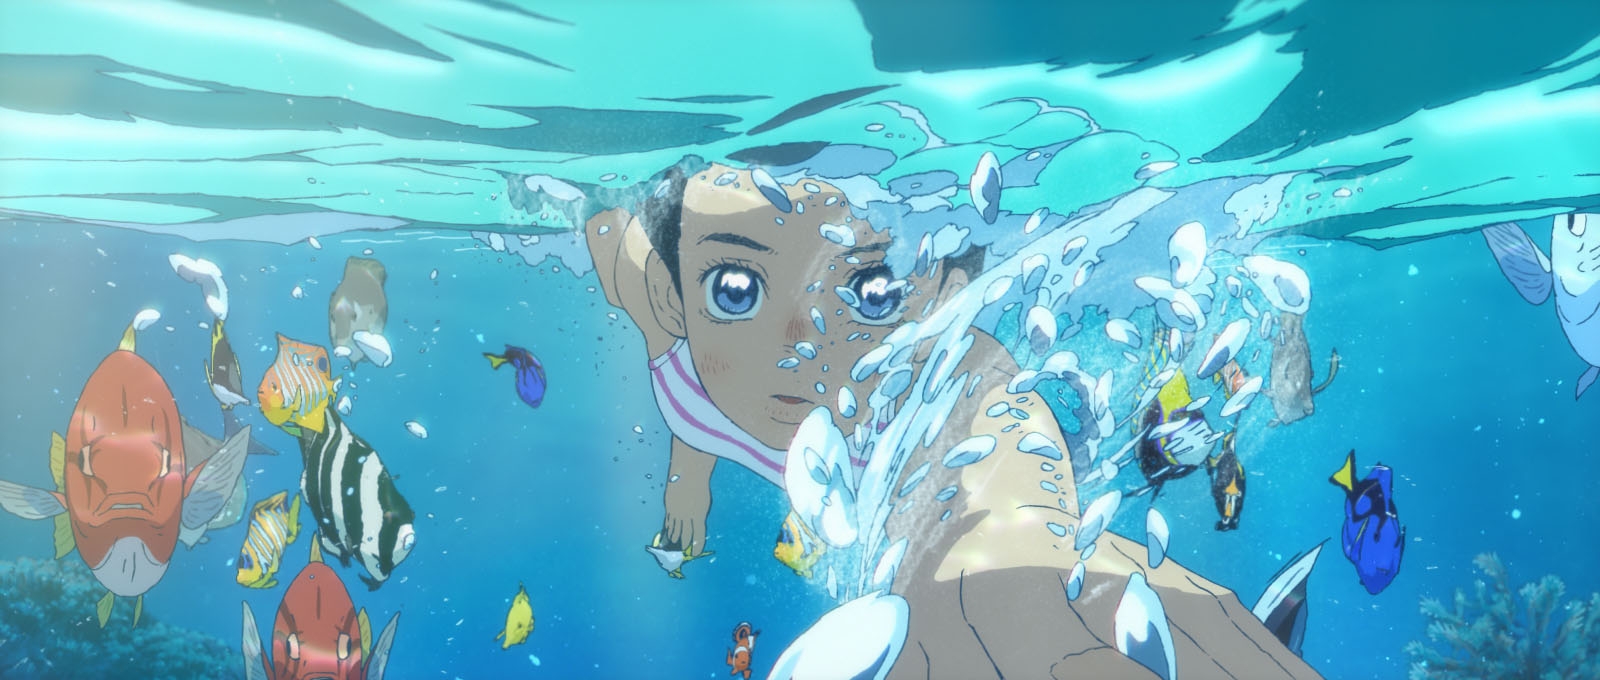 Children of the Sea': Diving deep into animated beauty | The Japan Times